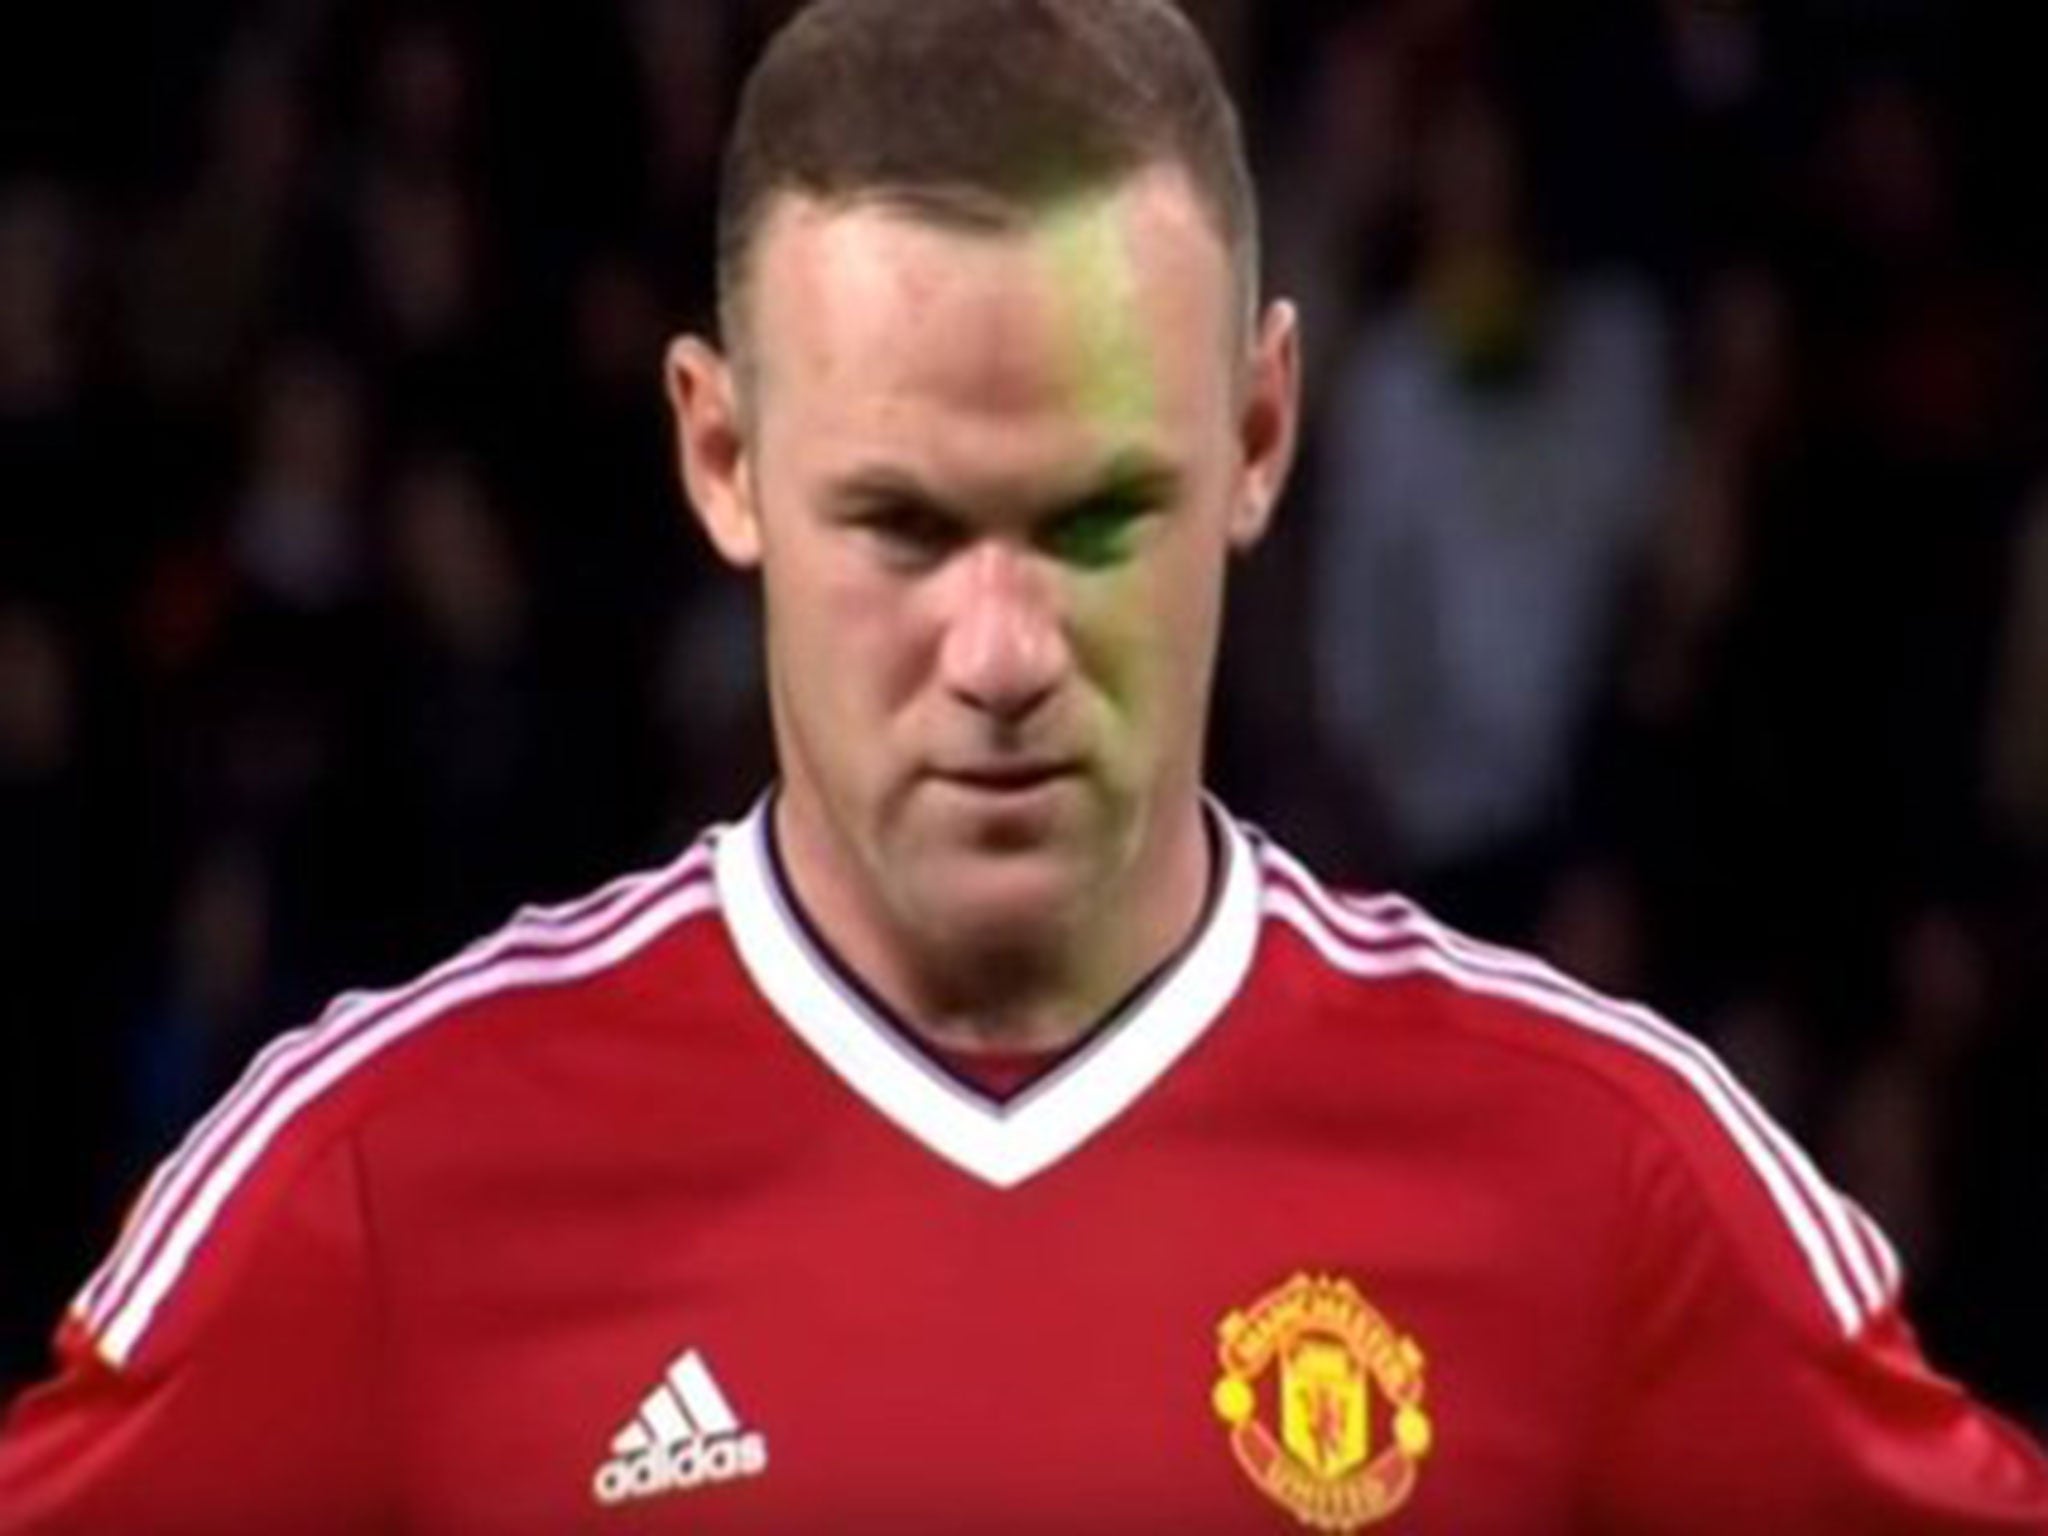 Wayne Rooney has a laser shone in his face before taking his penalty